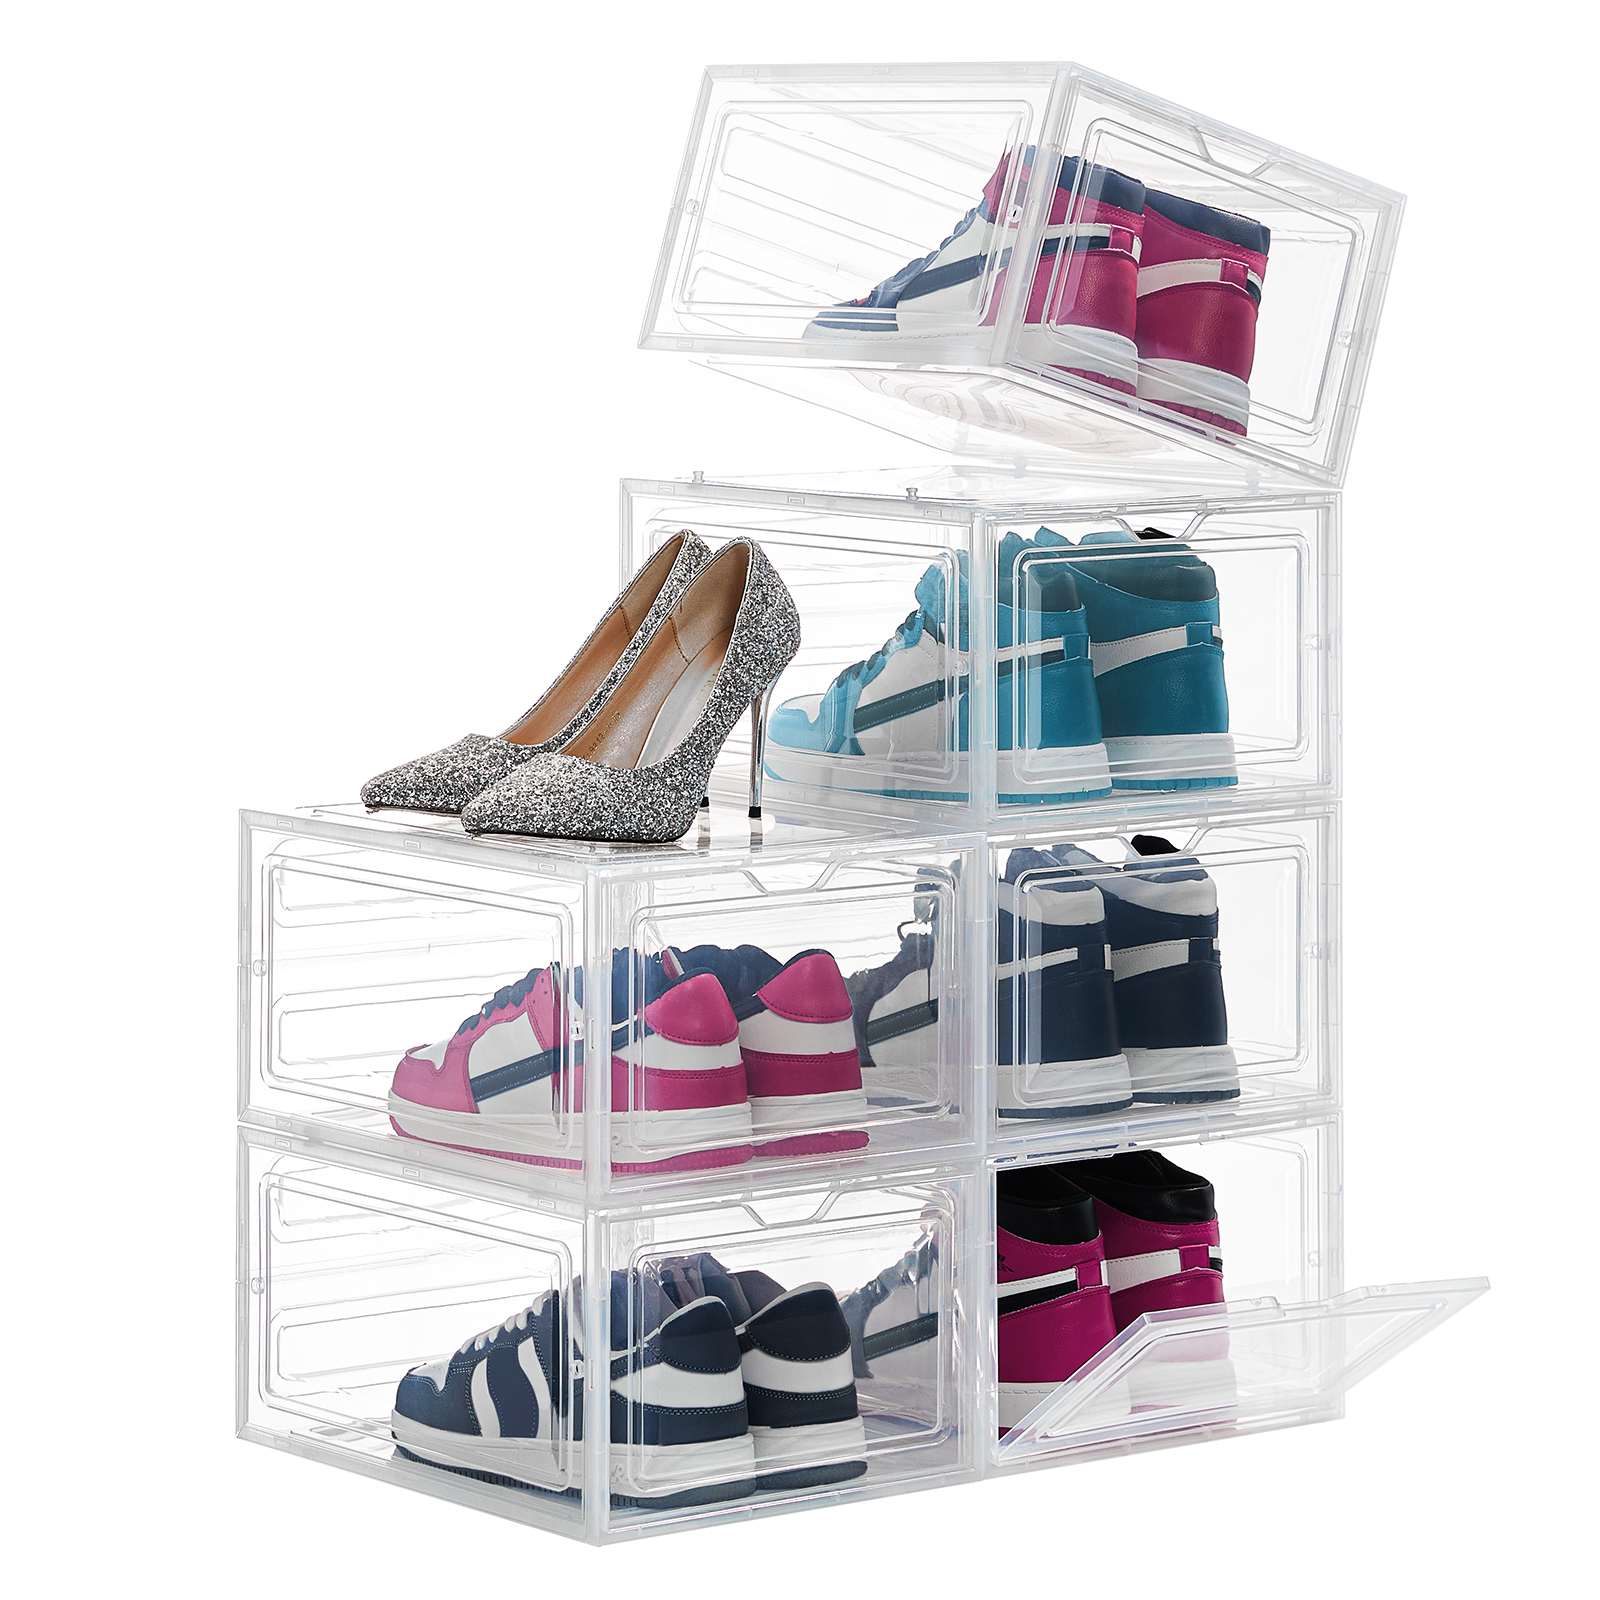 

Lifewit Shoe Storage Box Clear Stackable Hard Sturdy Plastic Shoe Organizer Bin Foldable Sneaker Display Containers Holders For Closet Entryway, Fit Up To Us Size 13